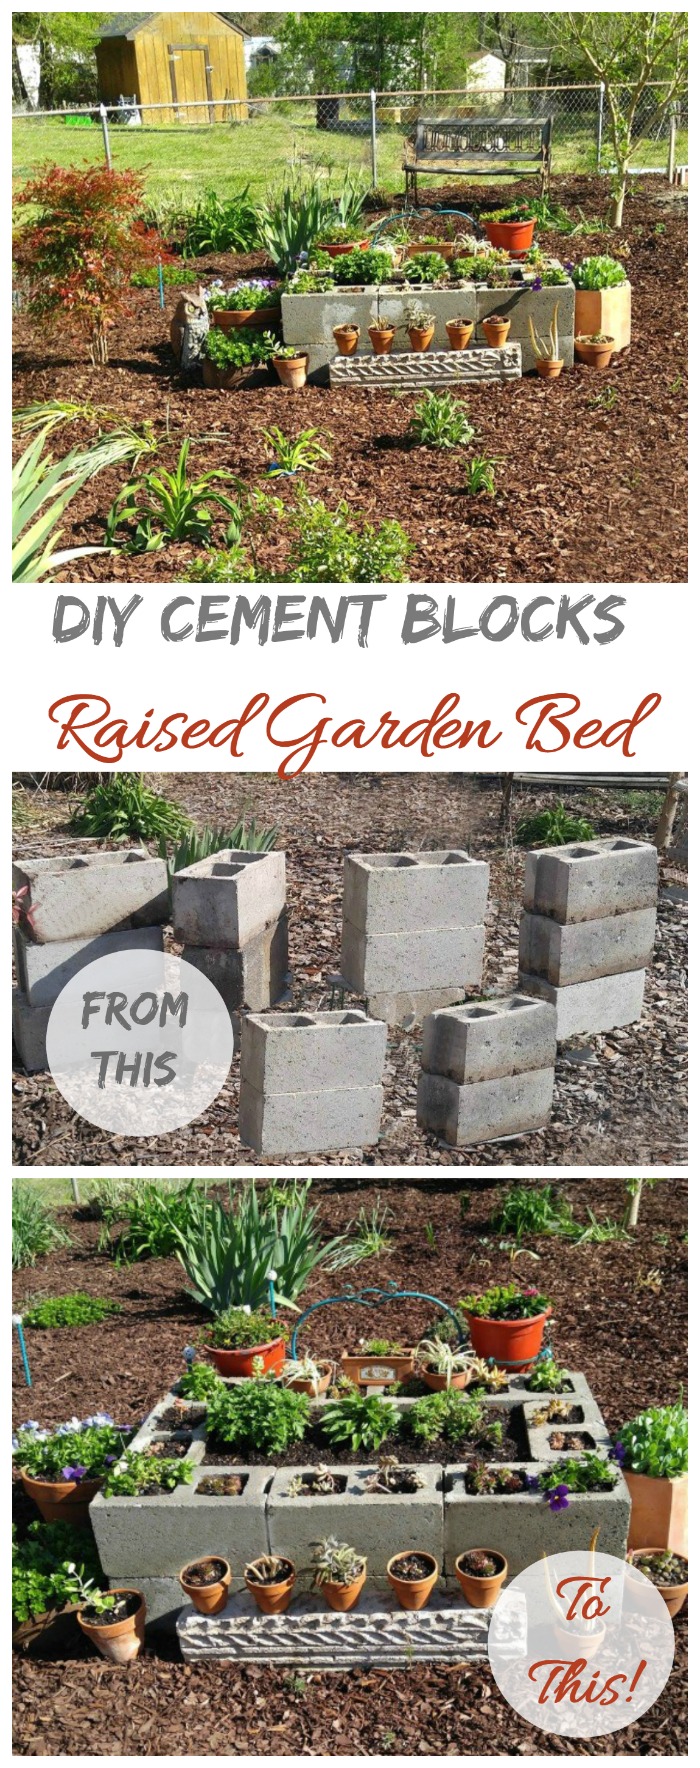 This cement block raised garden bed is simple to make and turns trash into treasure. It's perfect for growing succulents!